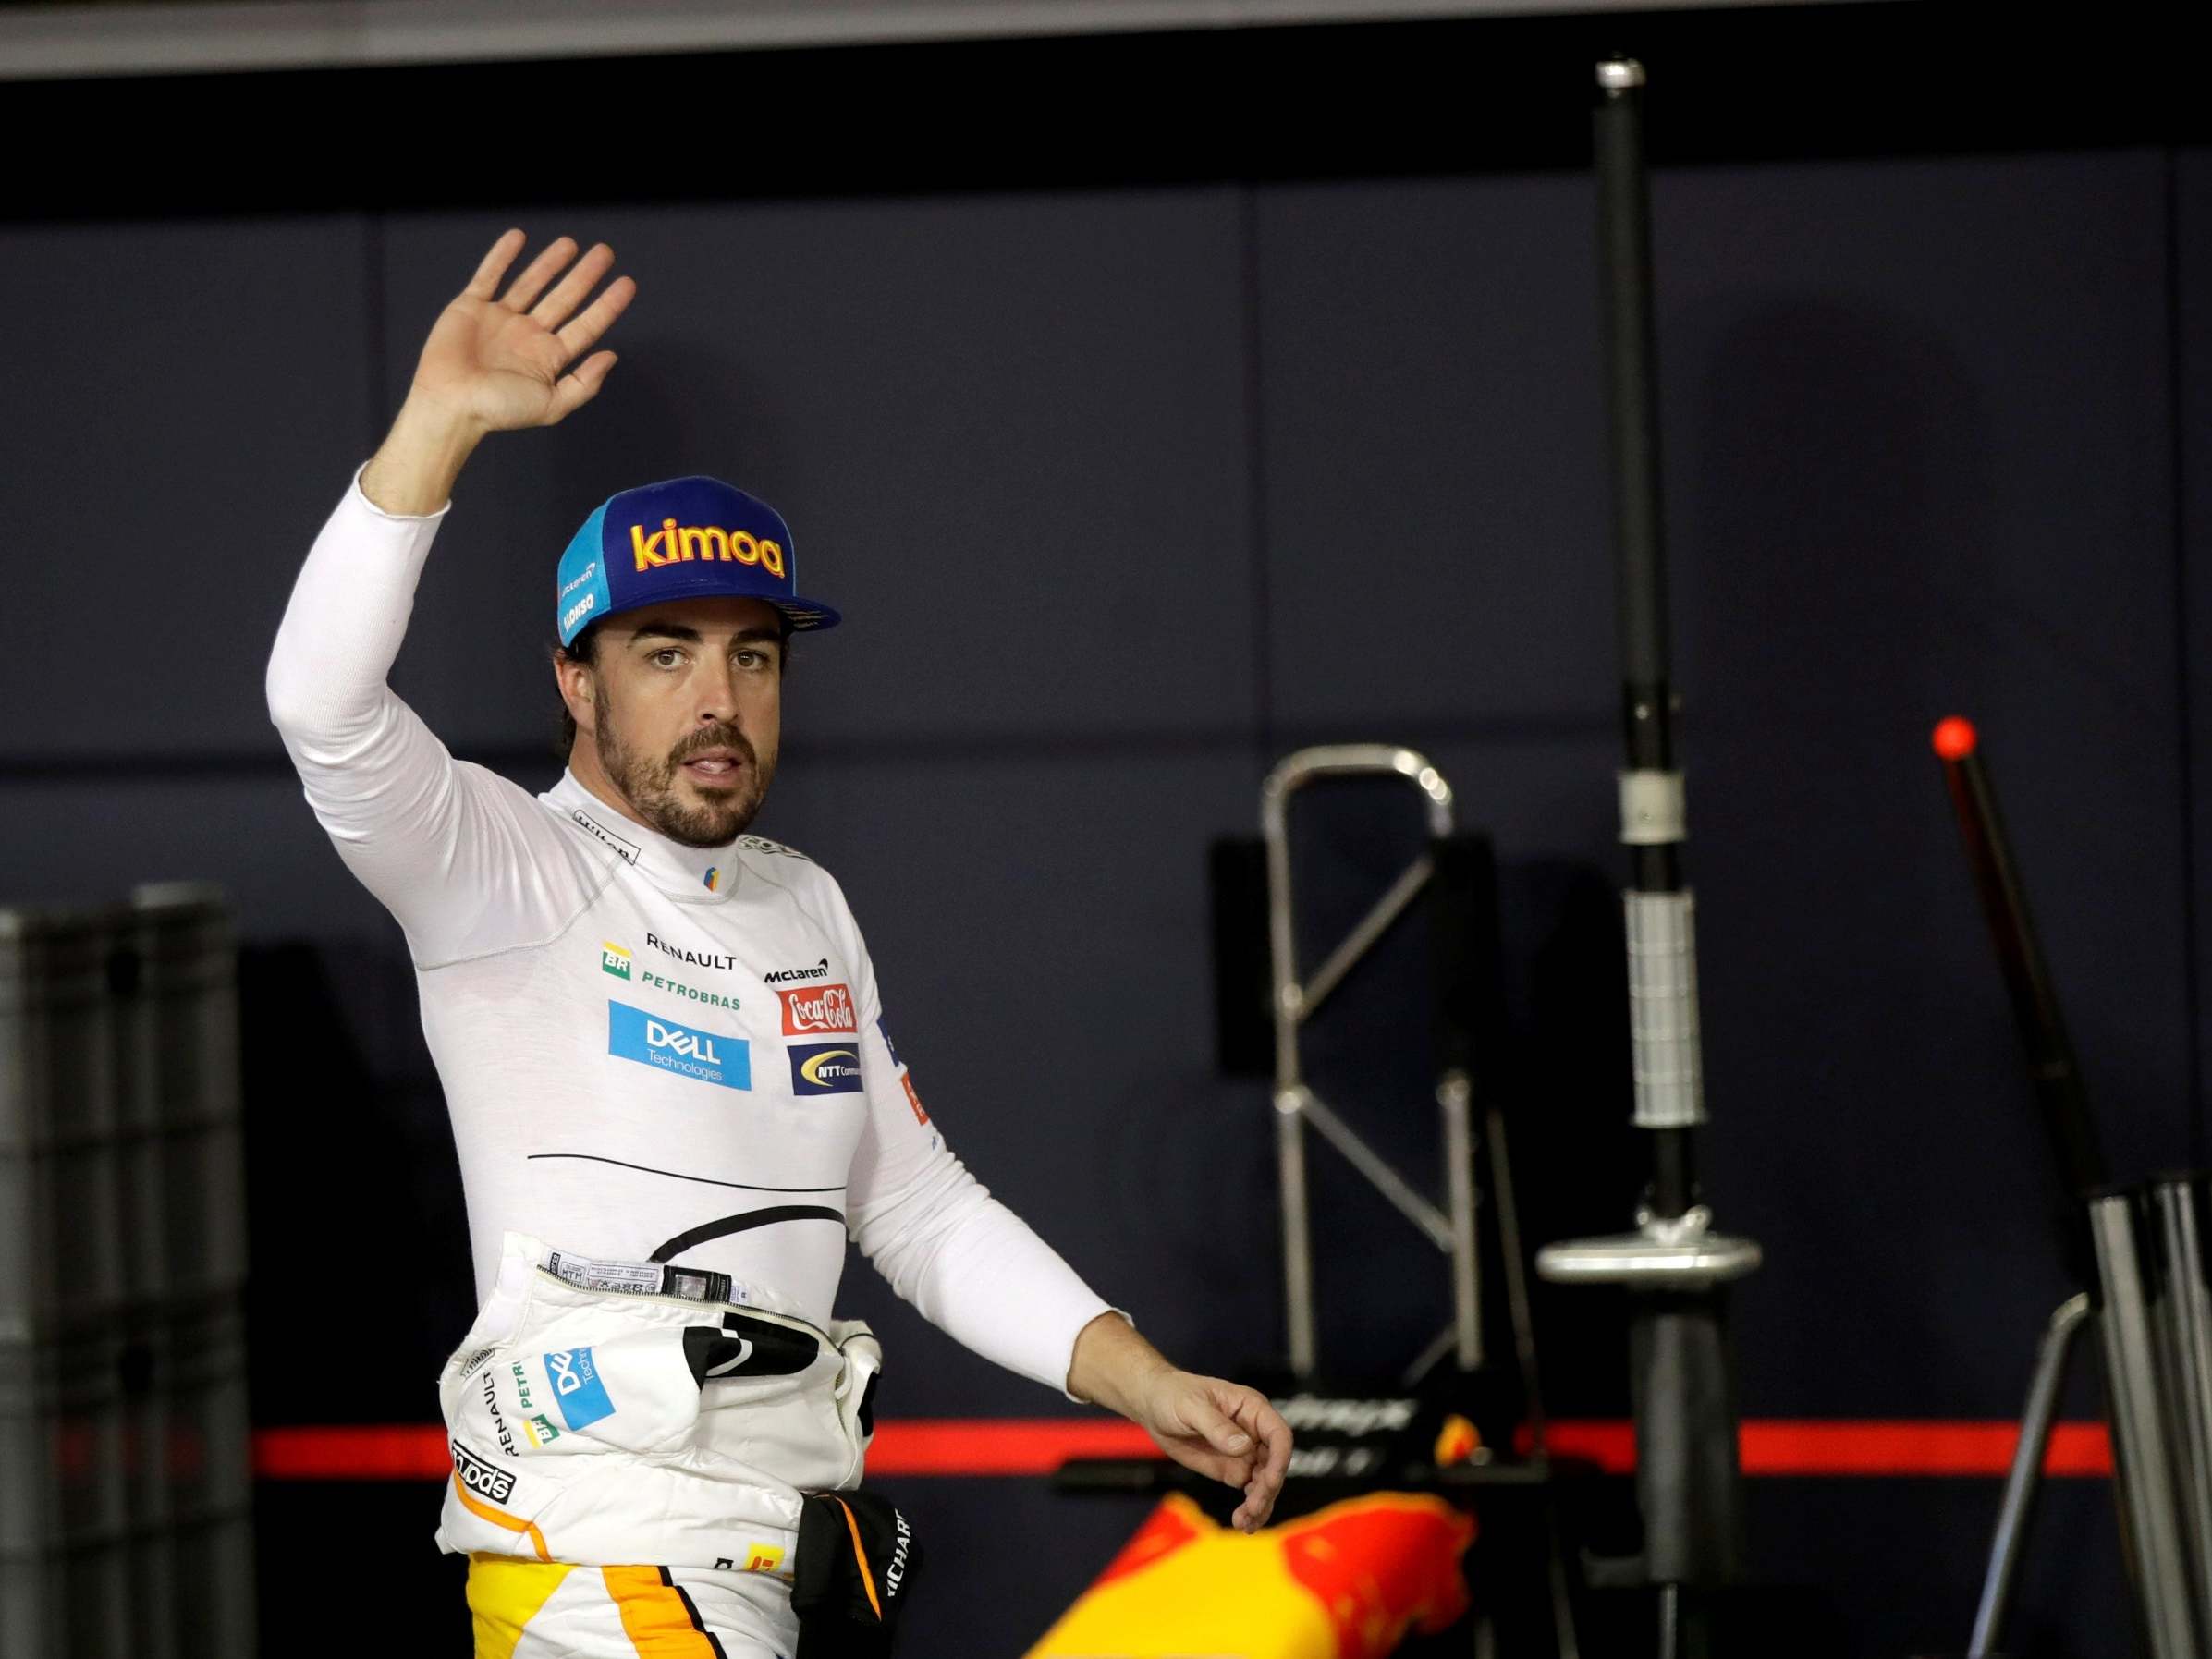 Fernando Alonso will return to Formula One in 2021 after two seasons away